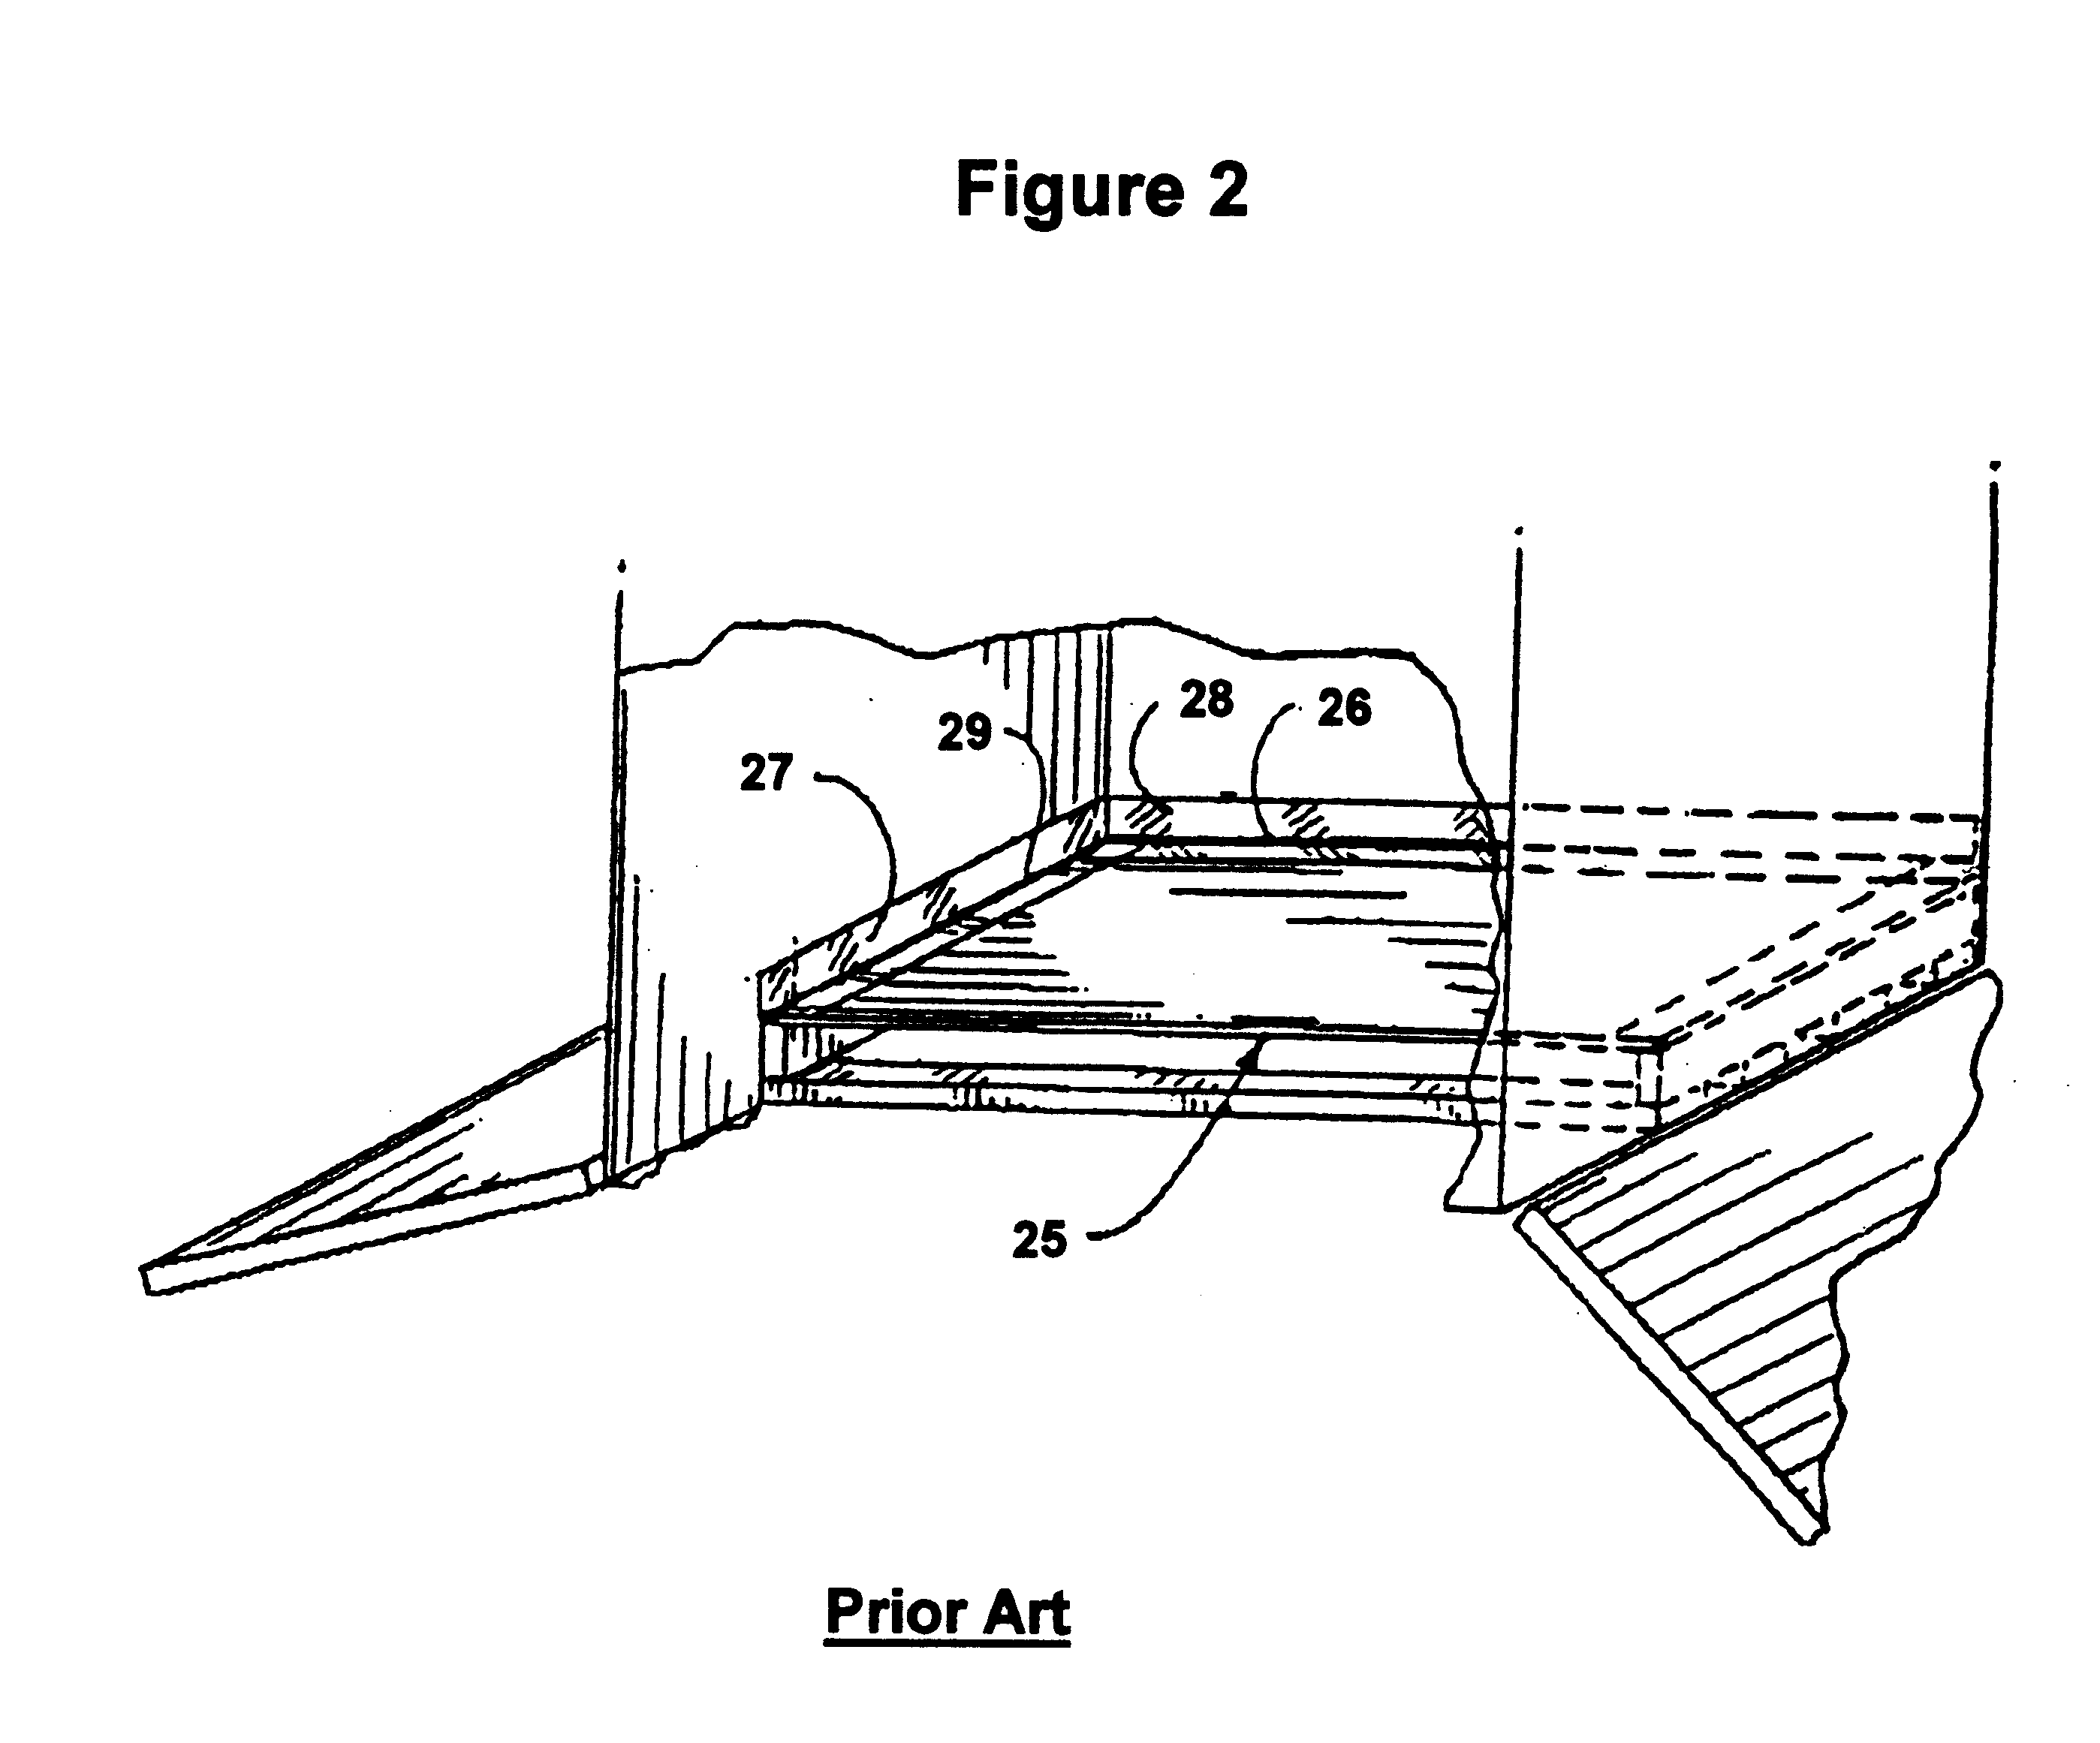 Bulkhead for retaining a cargo in a container